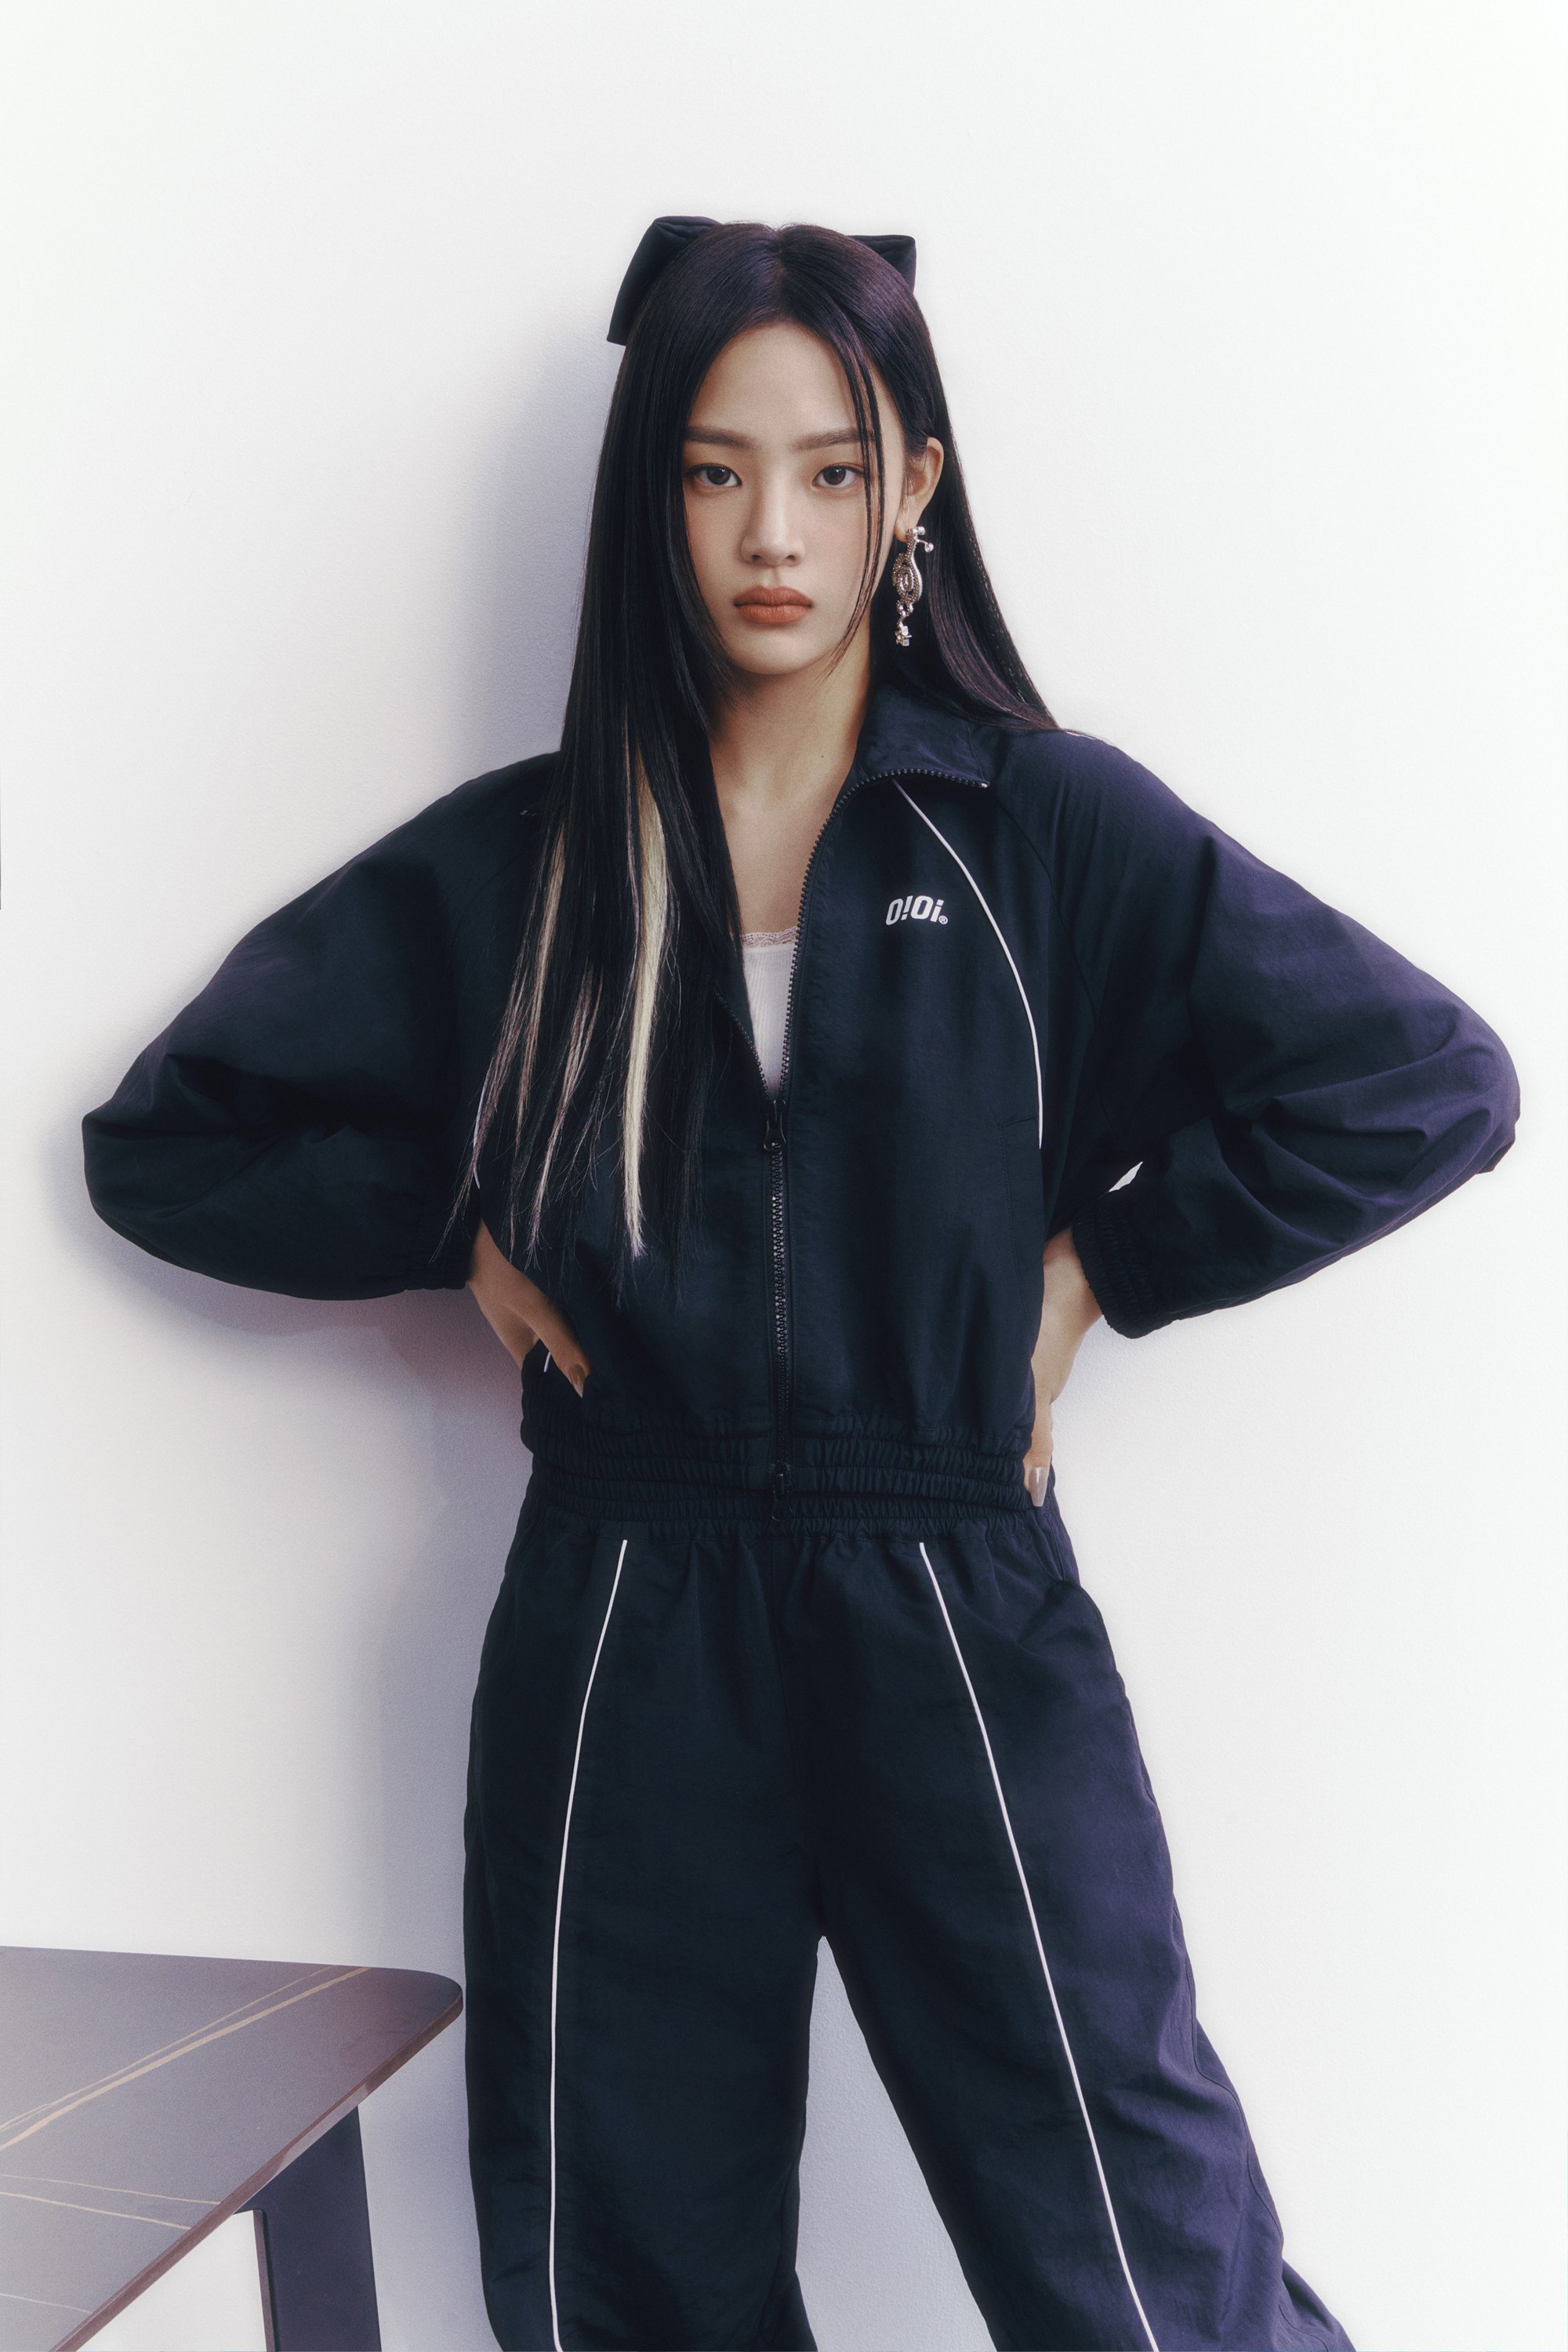 How K-pop rookies NewJeans became a luxury fashion fixture: Danielle just  signed with Burberry, following Hanni and Hyein's deals with Gucci and Louis  Vuitton … now our eyes are on Minji and